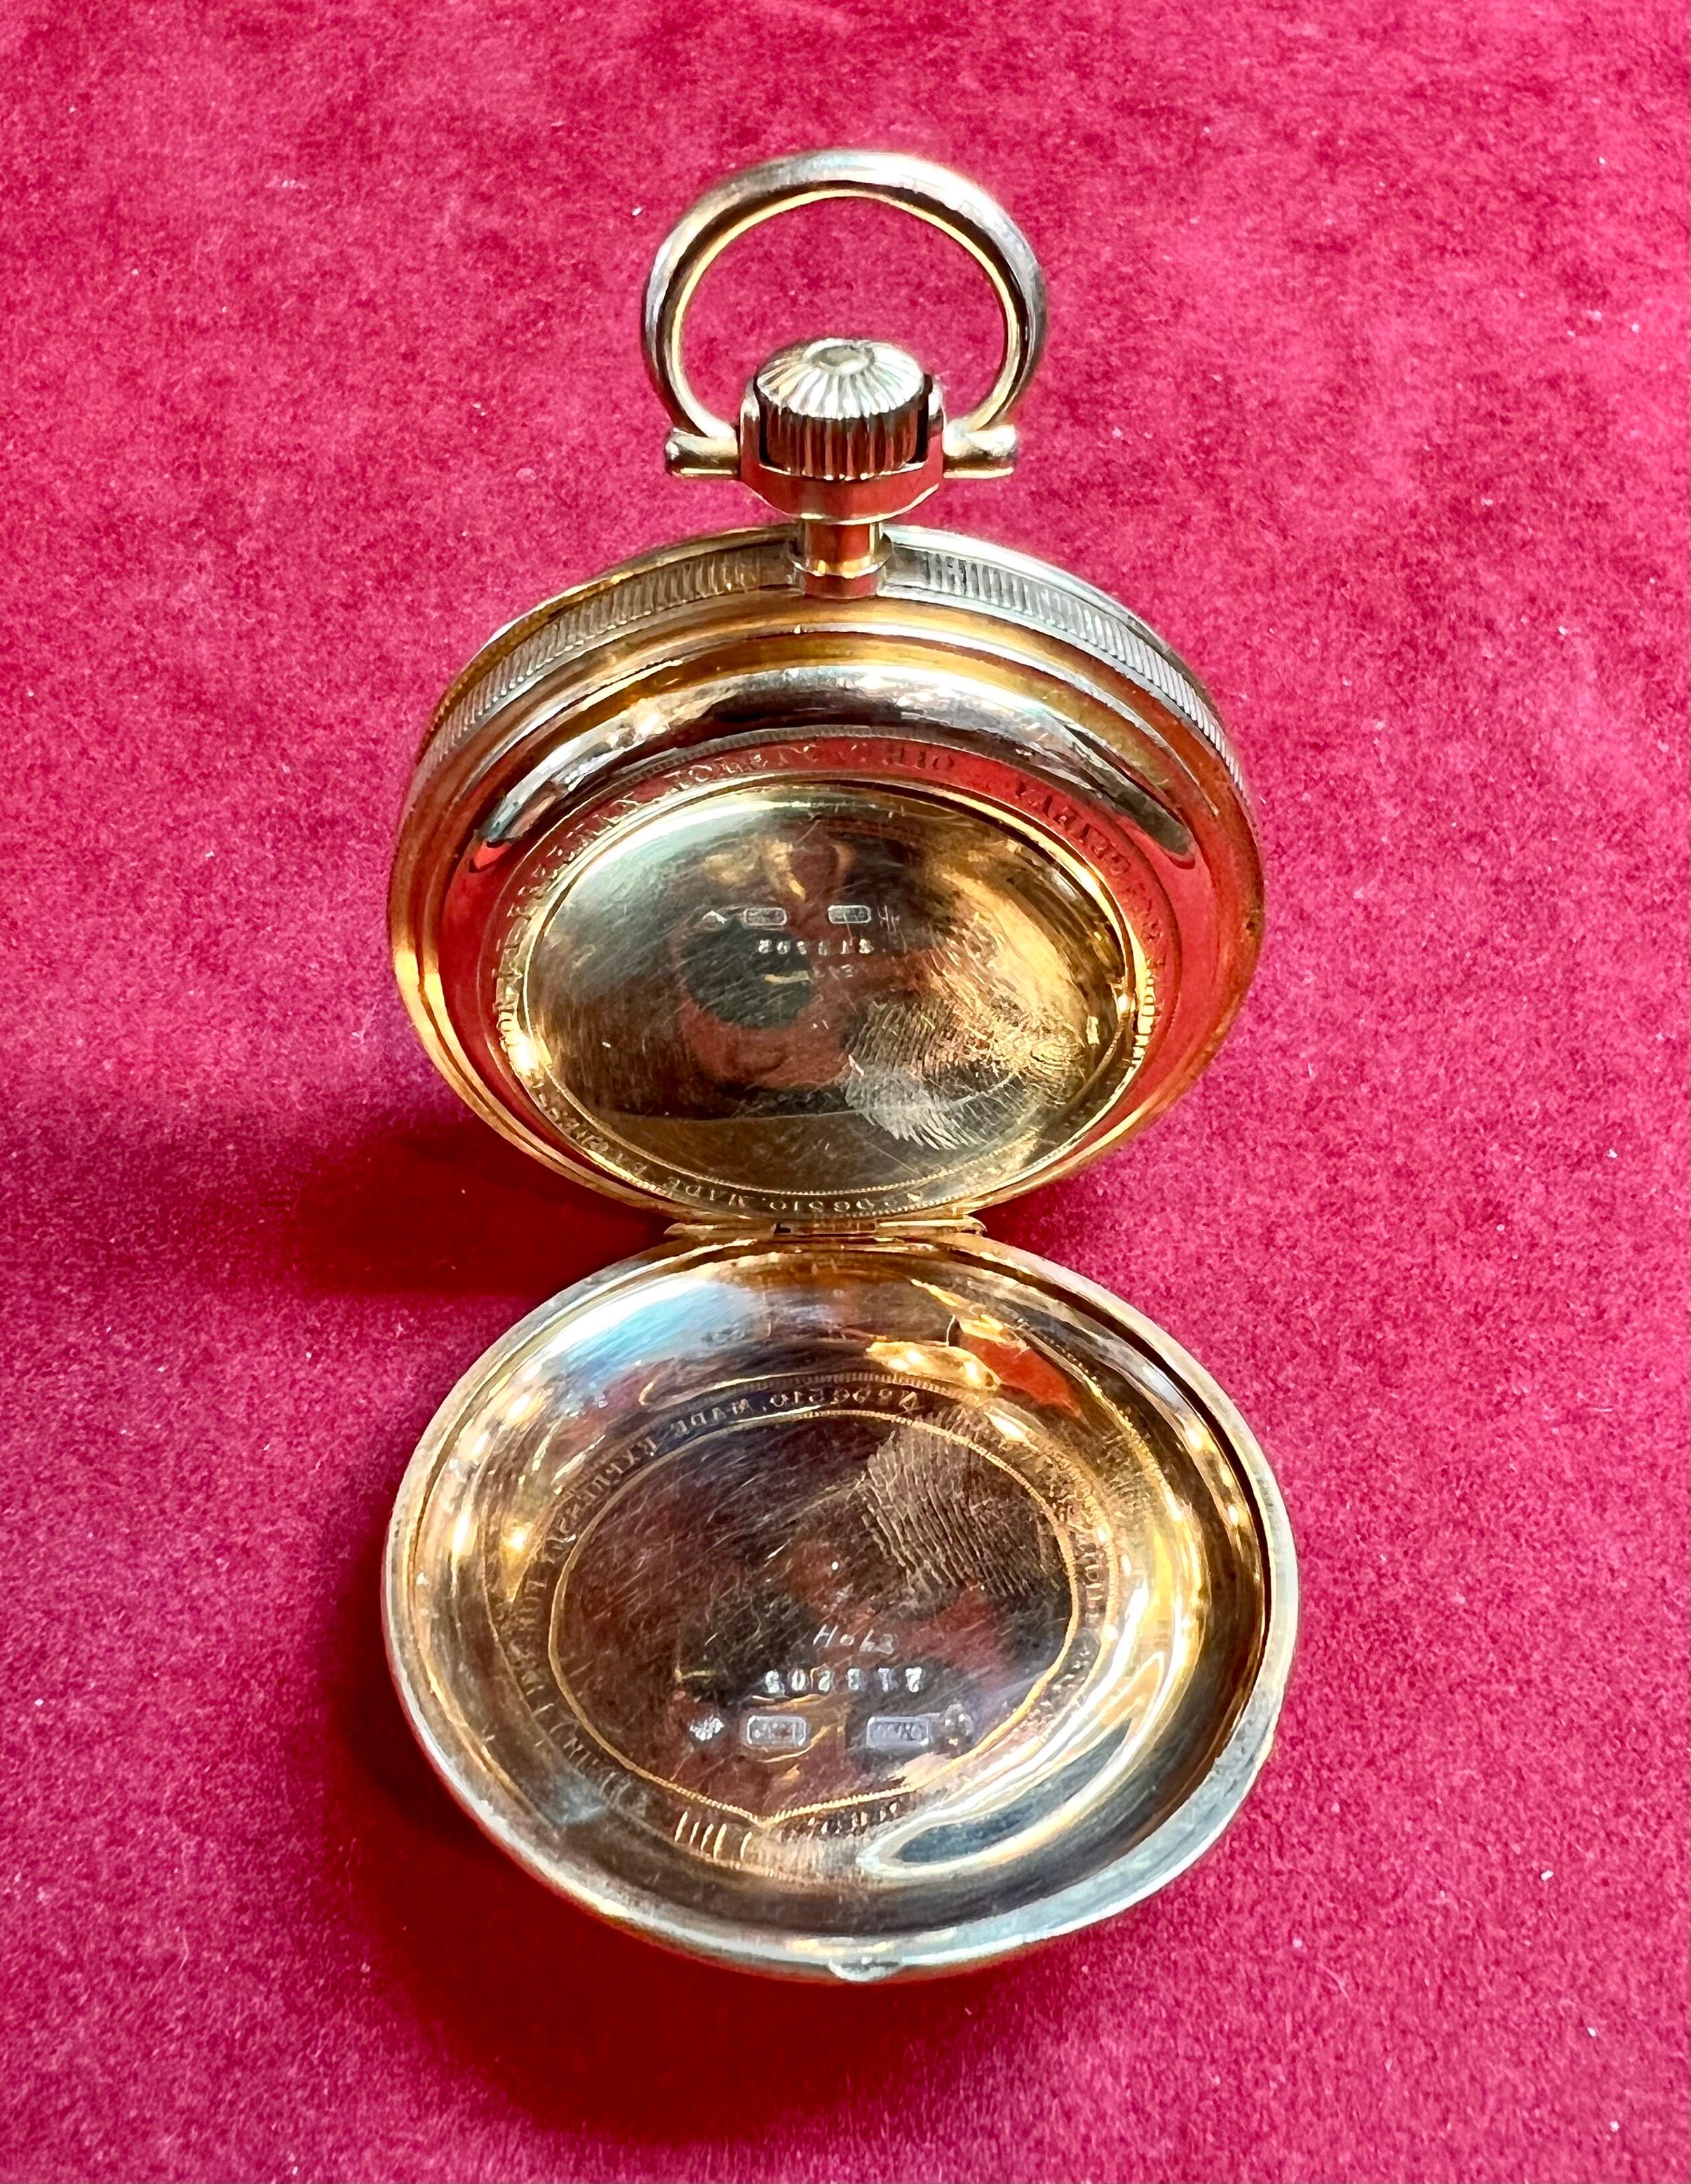 Patek Philippe XIX Century Open-Face Gold Pocket Watch dated January 13 1891
Serial number 96510 and contrast number 213206
Expressly made for JJ Freman Toledo, O 
Beautiful 43m/1.69 in 18k gold case  external lid. Internal lid is plain. Gold